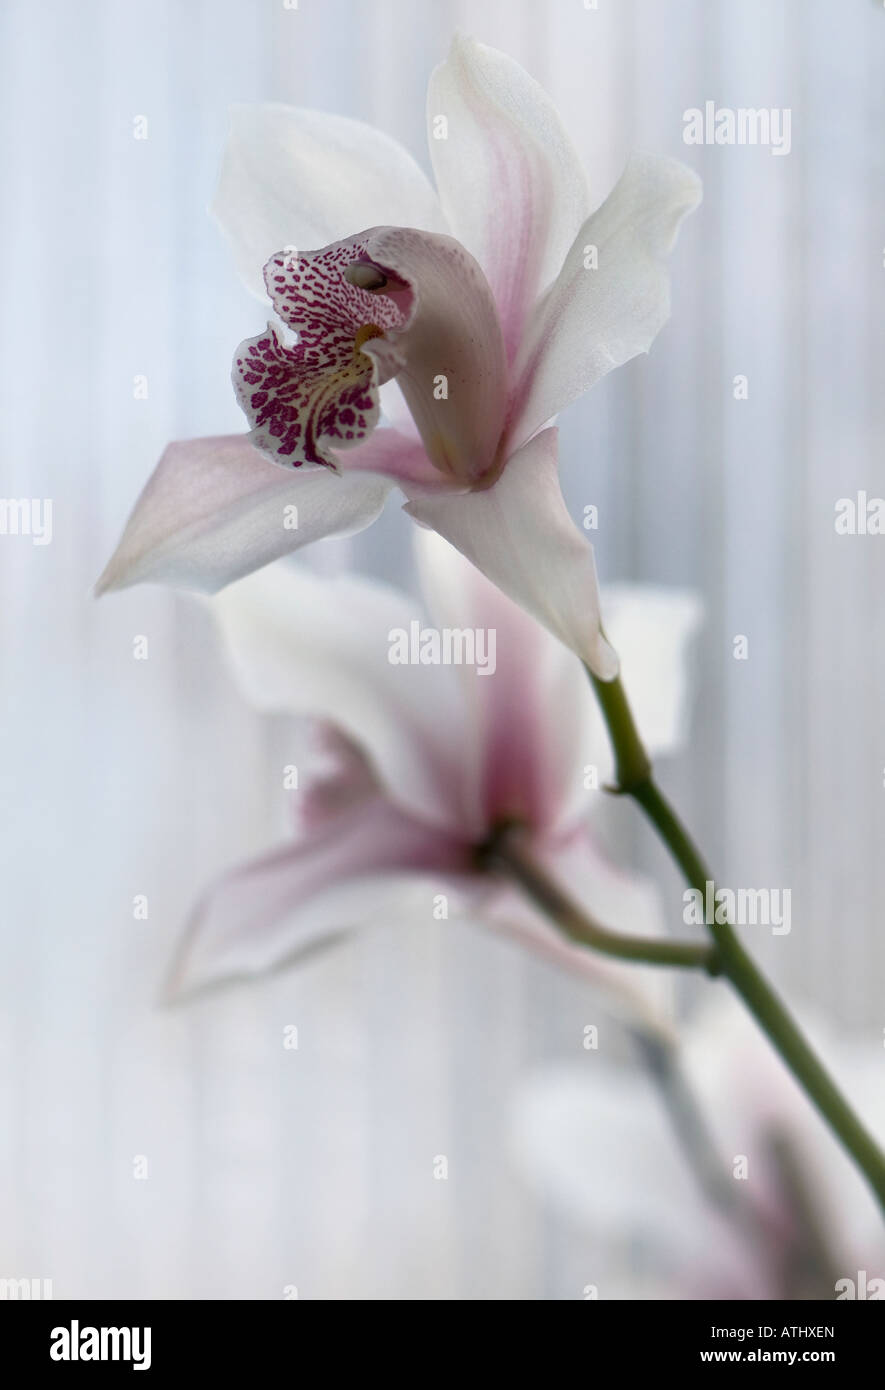 Up close shot of pale pink cattleya orchid Stock Photo